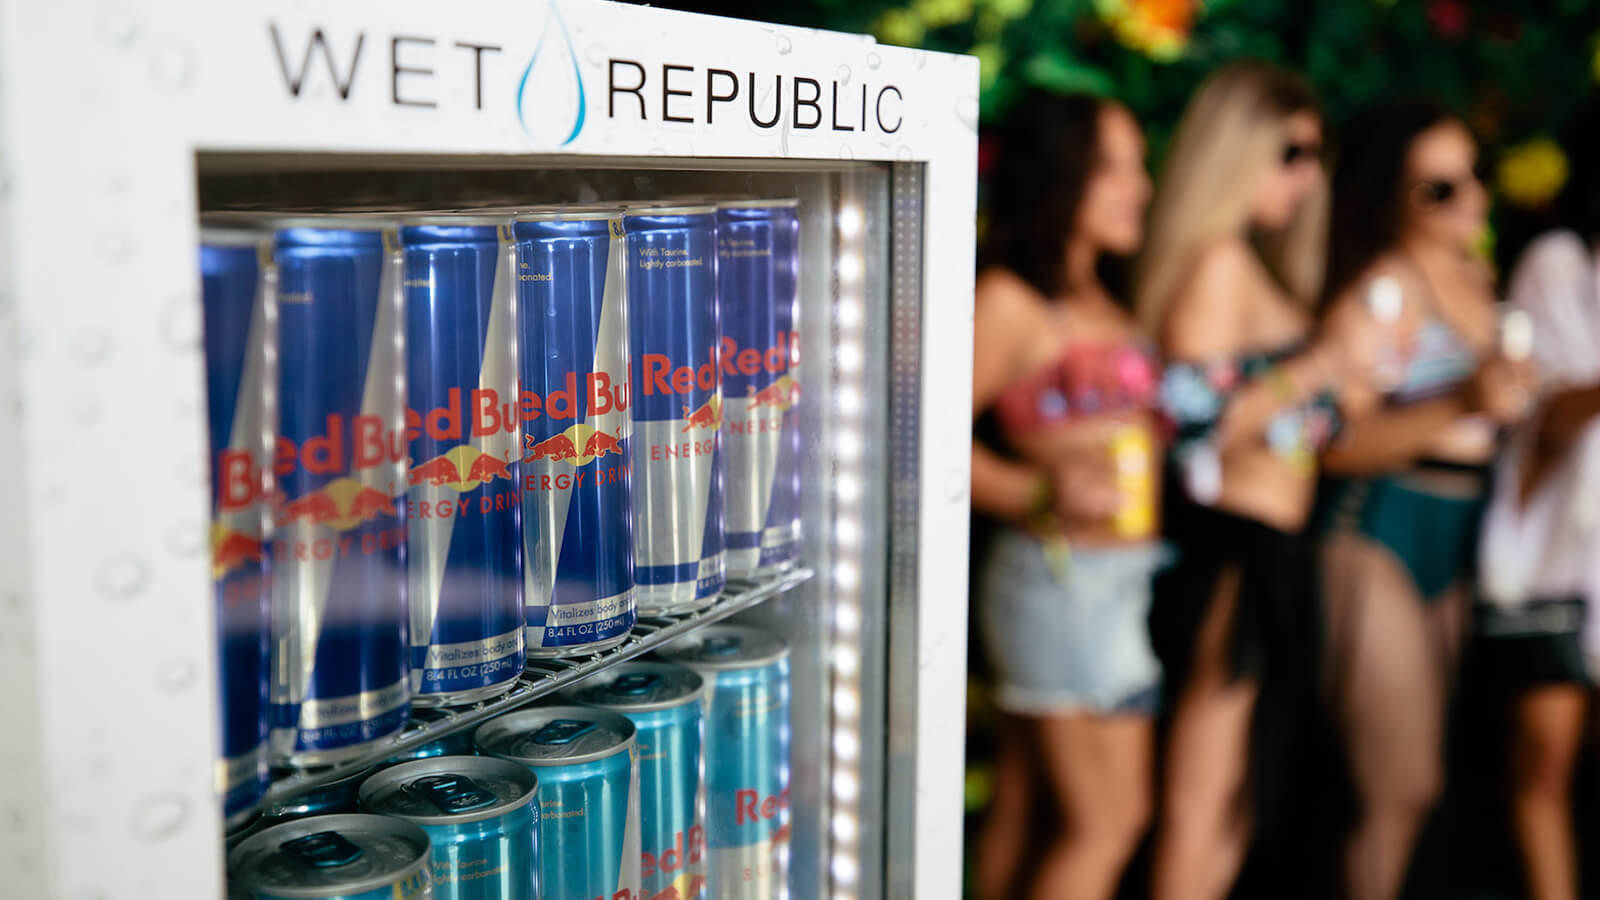 Red Bull Case with Wet Republic Logo